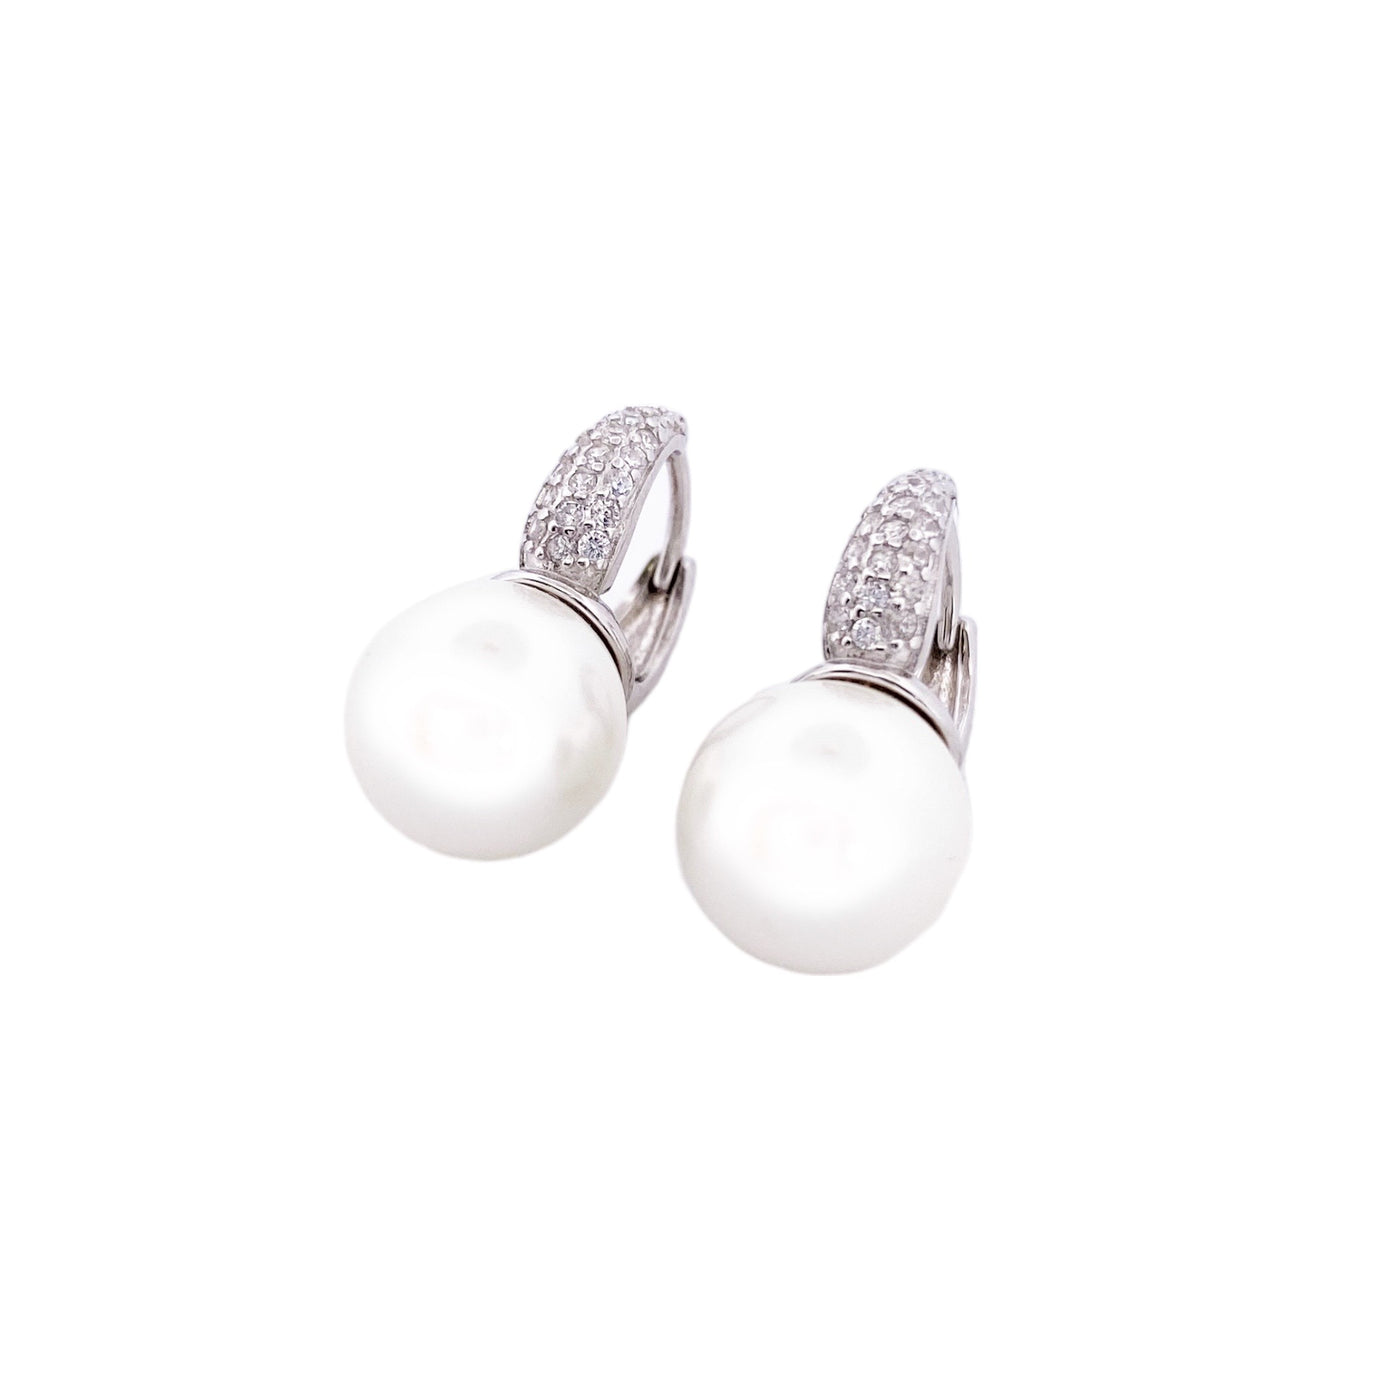 PEARLS EARRINGS WITH CZ